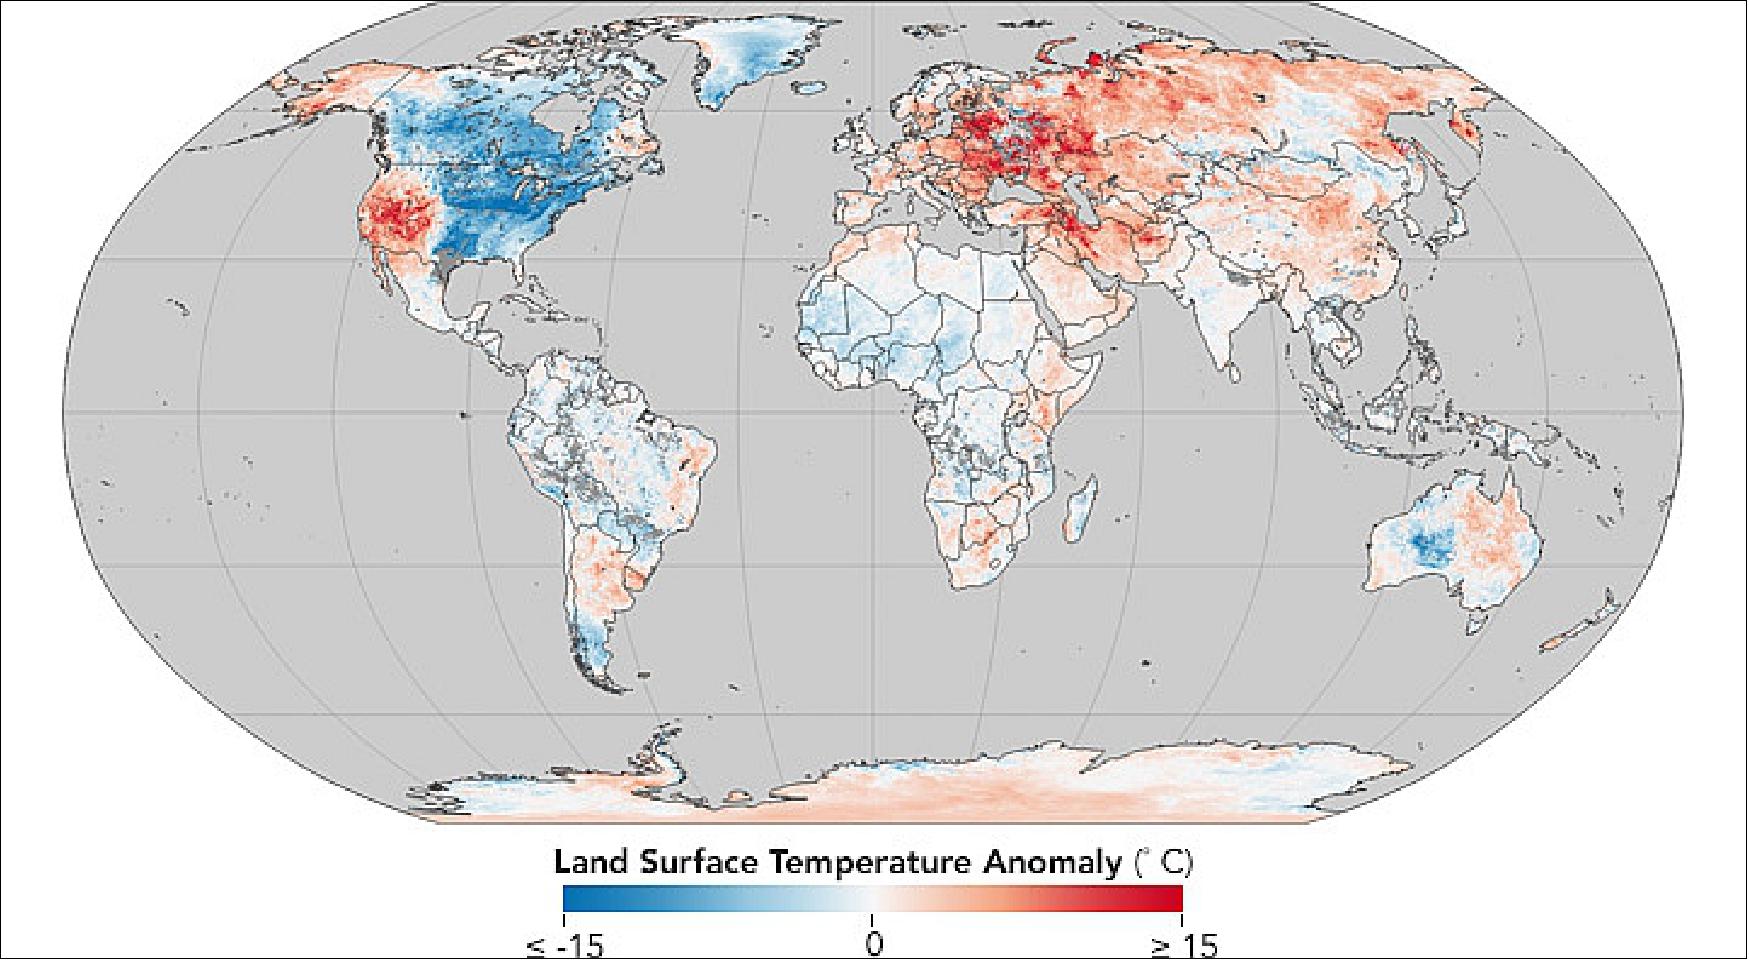 Figure 47: MODIS land surface temperature map of the world, acquired in the period 26 Dec. 2017 to 2 Jan. 2018 (image credit: NASA Earth Observatory maps by Jesse Allen, based on MODIS land surface temperature data provided by the Land Processes Distributed Active Archive Center. Story by Adam Voiland)